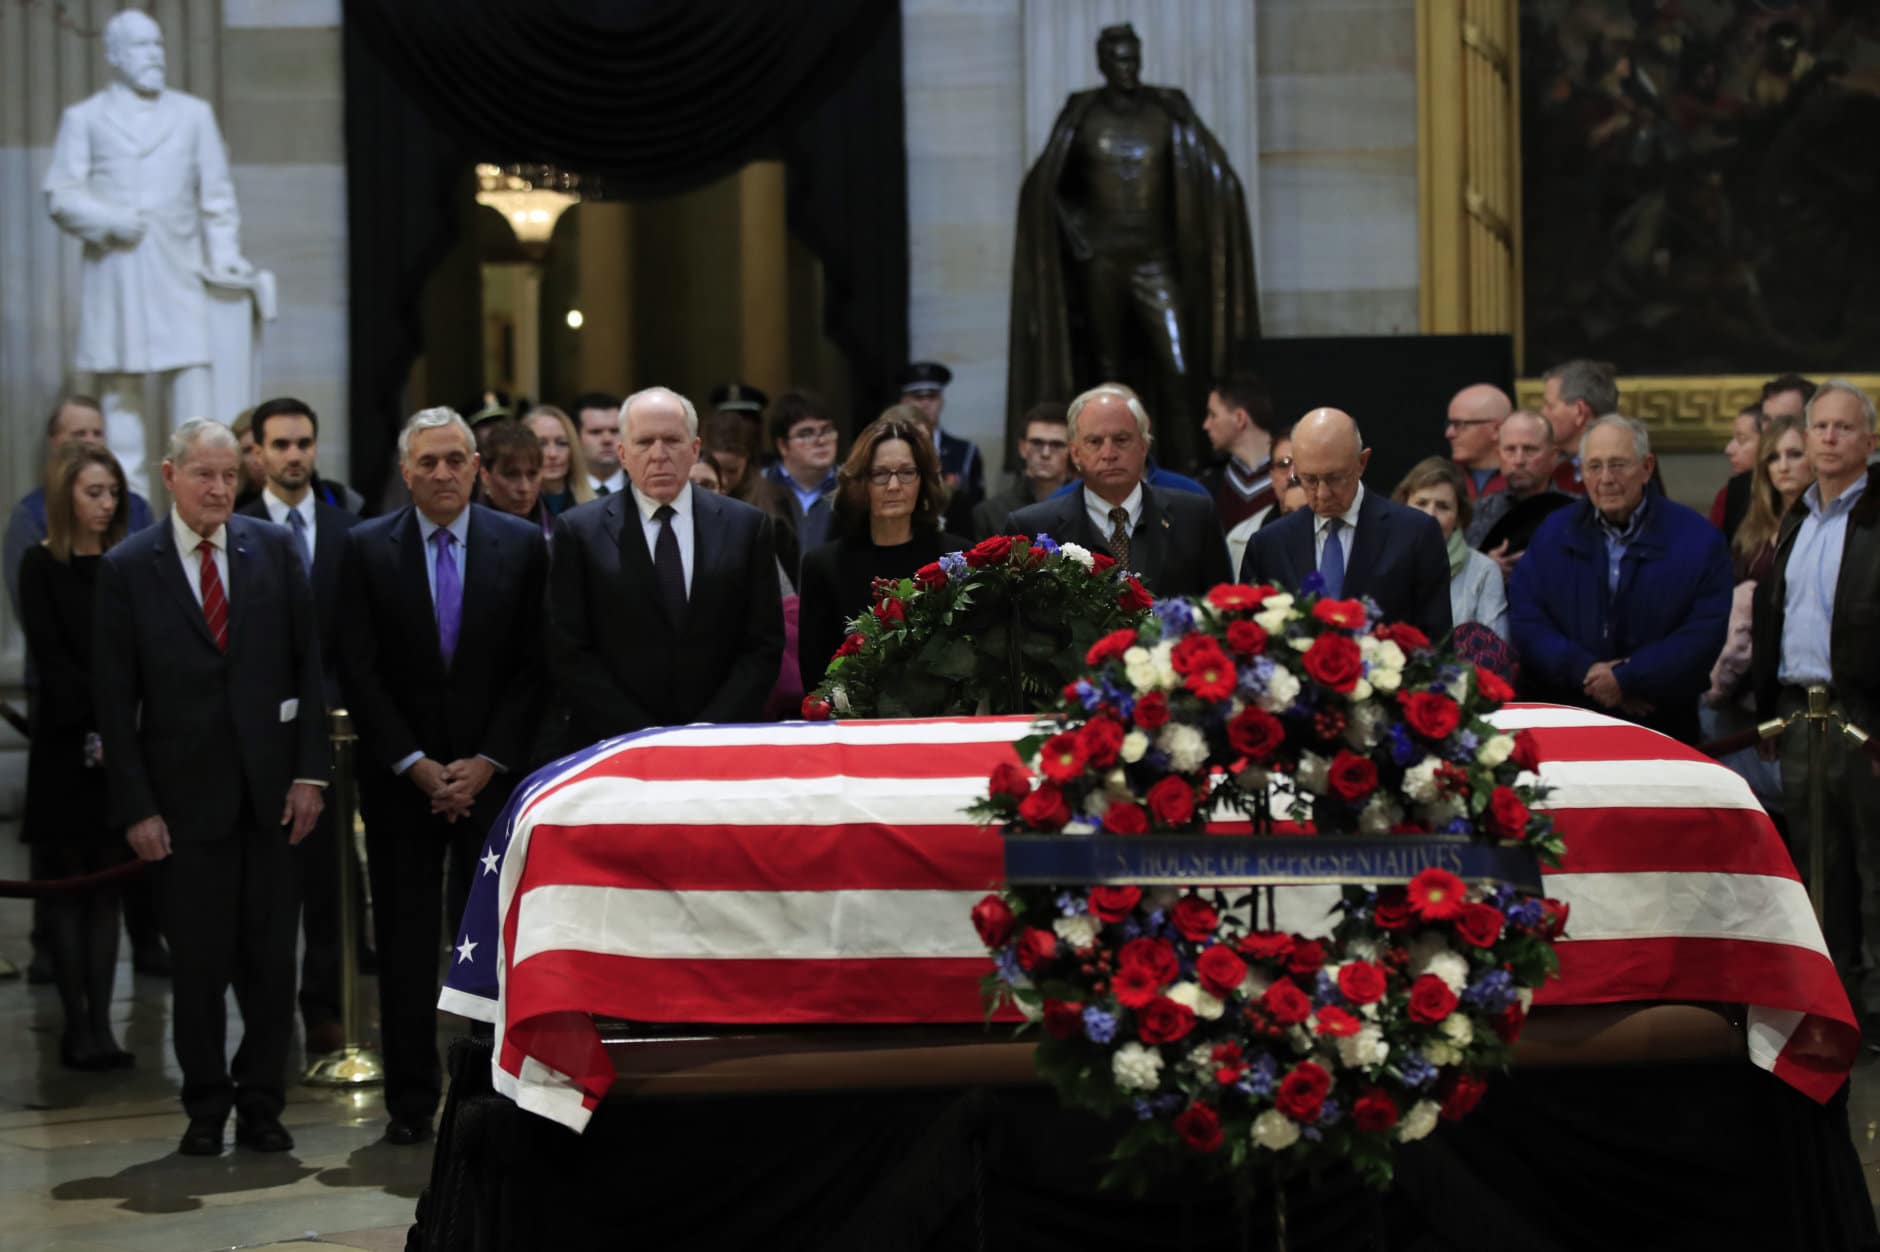 CIA Director Gina Haspel together with former CIA Directors, from left, William Webster, George Tenet, John Brennan, Haspel, Porter Goss and James Woolsey, pay their last respect to former President George H.W. Bush as he lie in state at the U.S. Capitol in Washington, Tuesday, Dec. 4, 2018.  (AP Photo/Manuel Balce Ceneta)